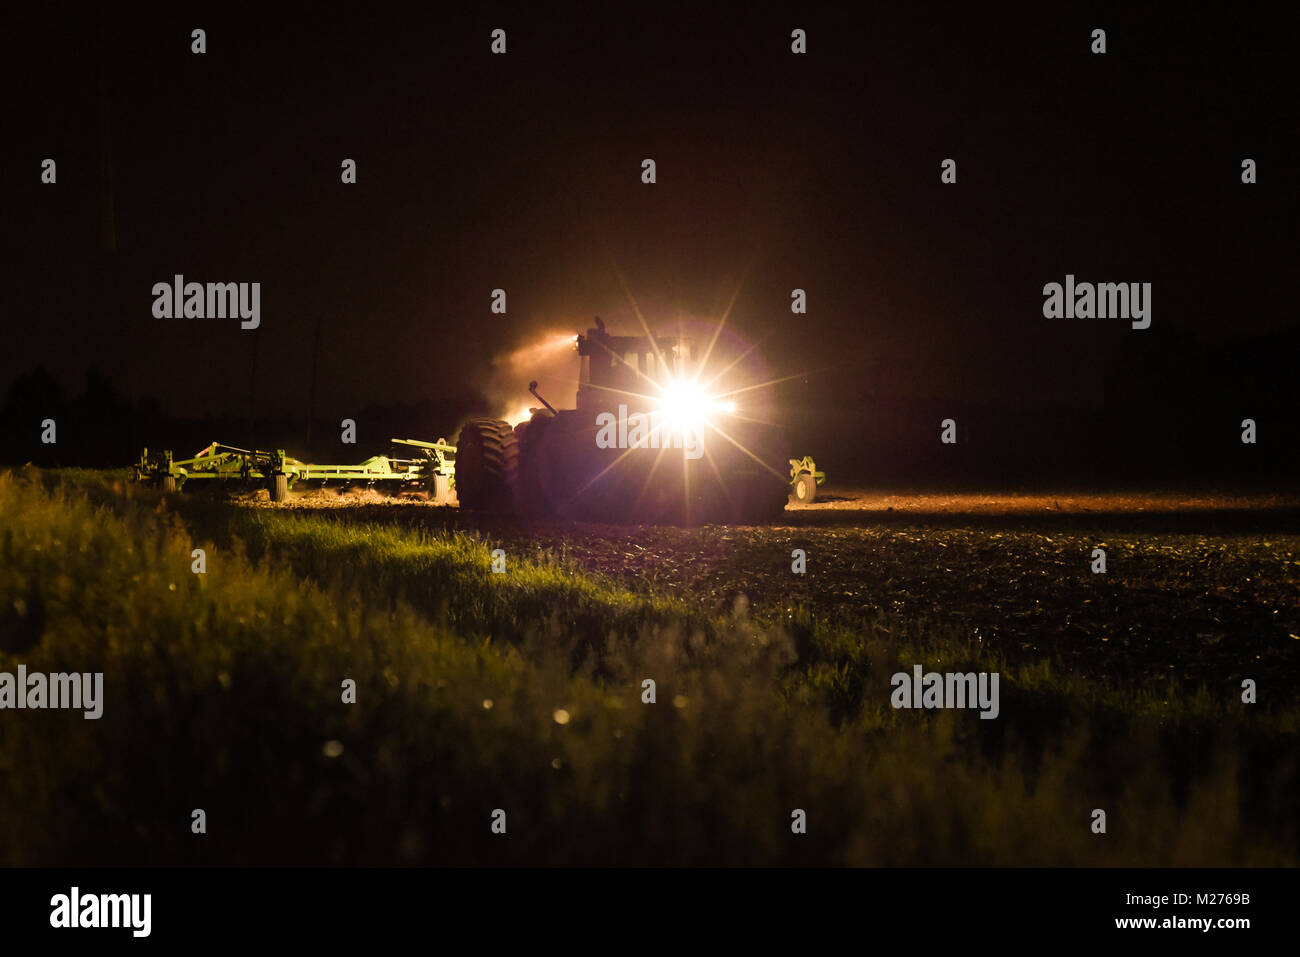 Farmer working the field at night Stock Photo